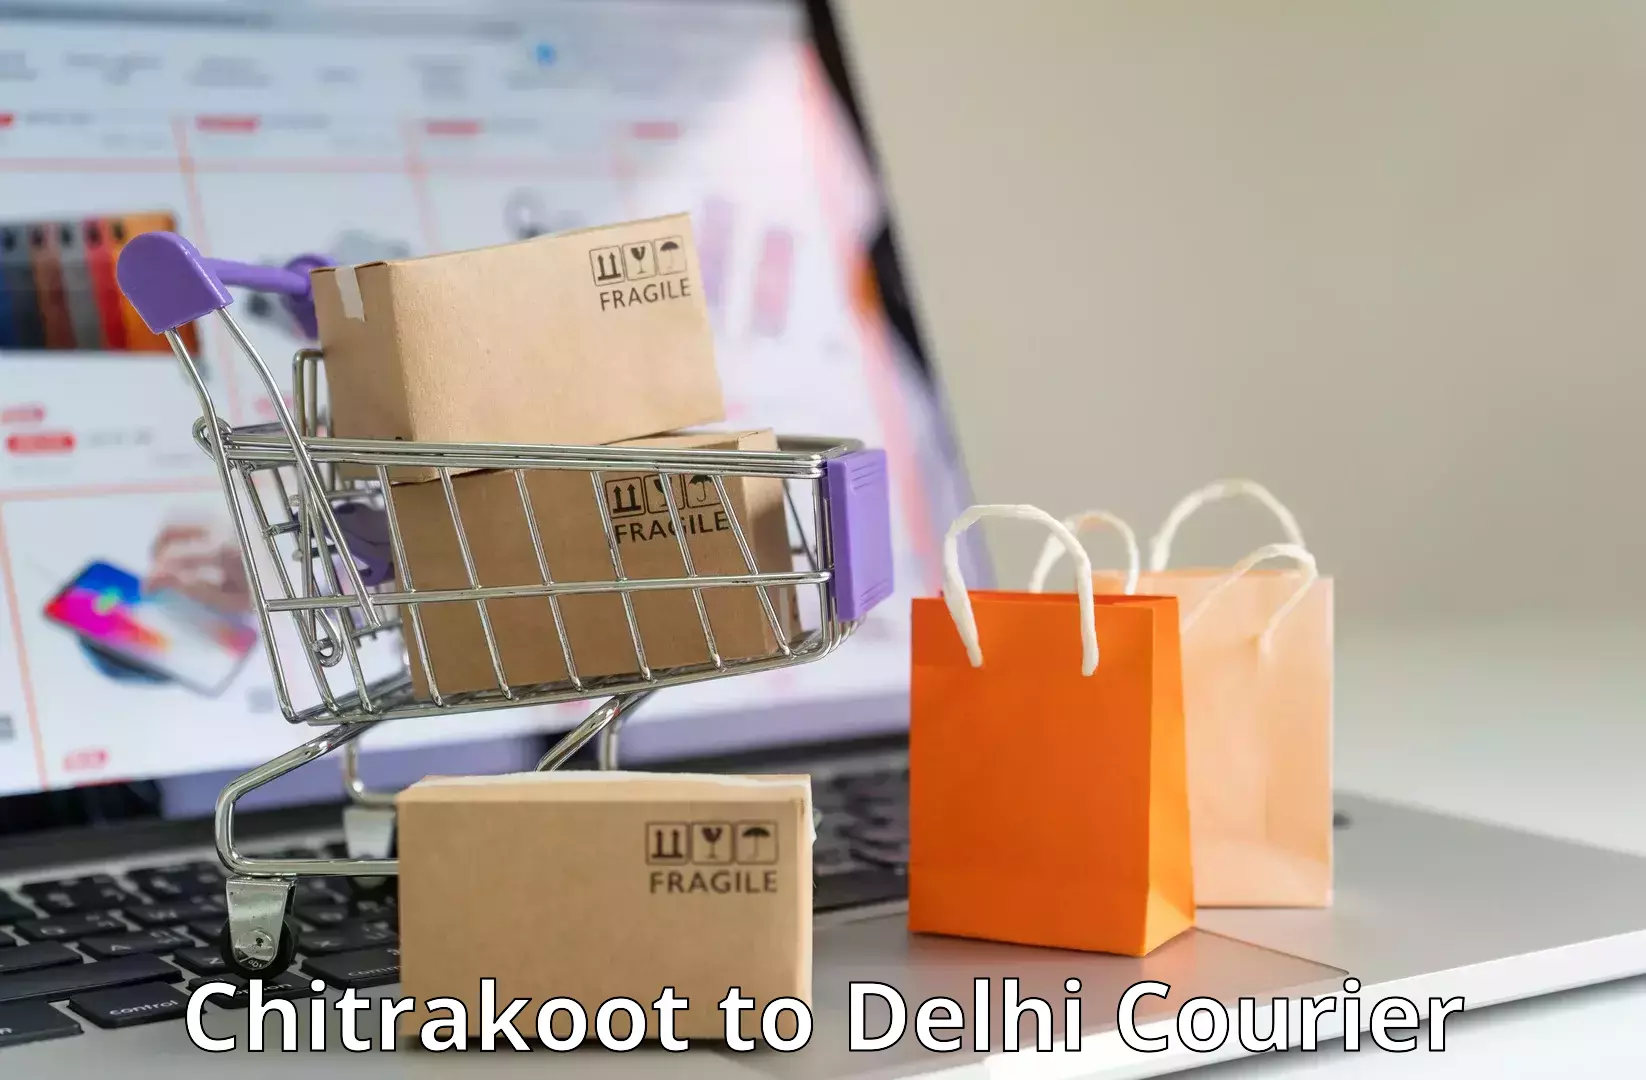 Express delivery network Chitrakoot to Delhi